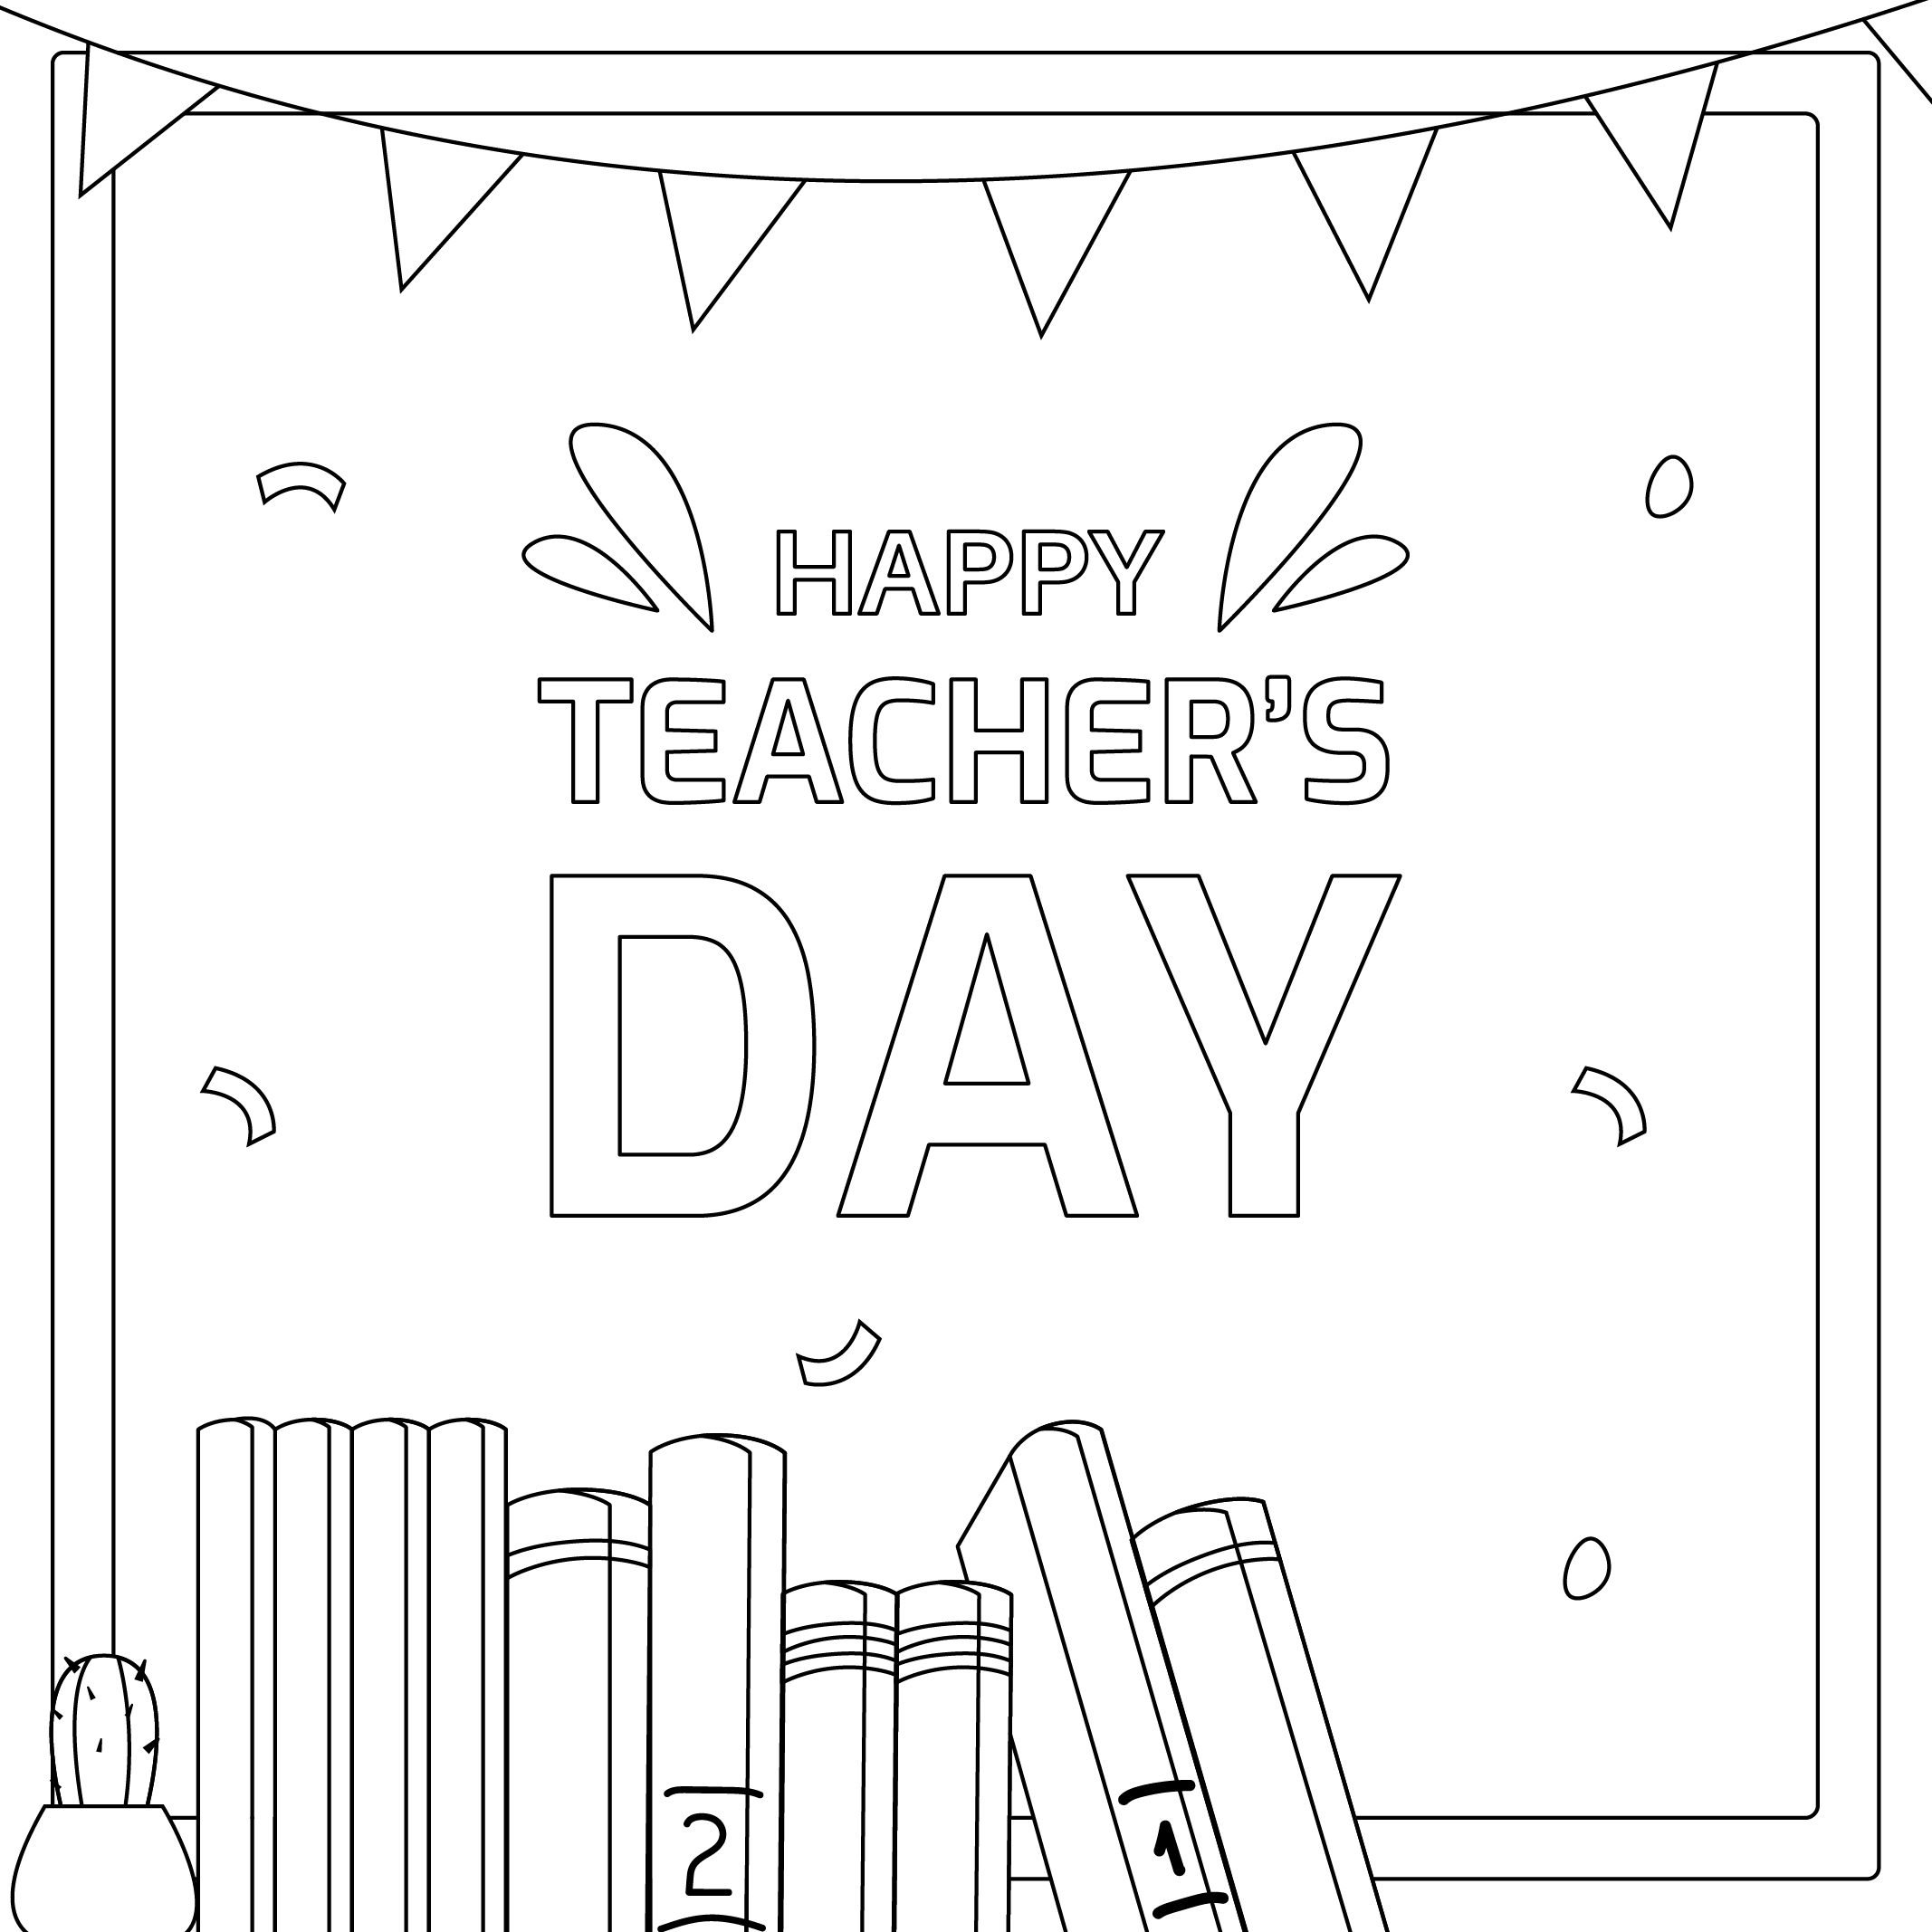 How to Make a Homemade Teacher's Day Card: 7 Steps (with Pictures)